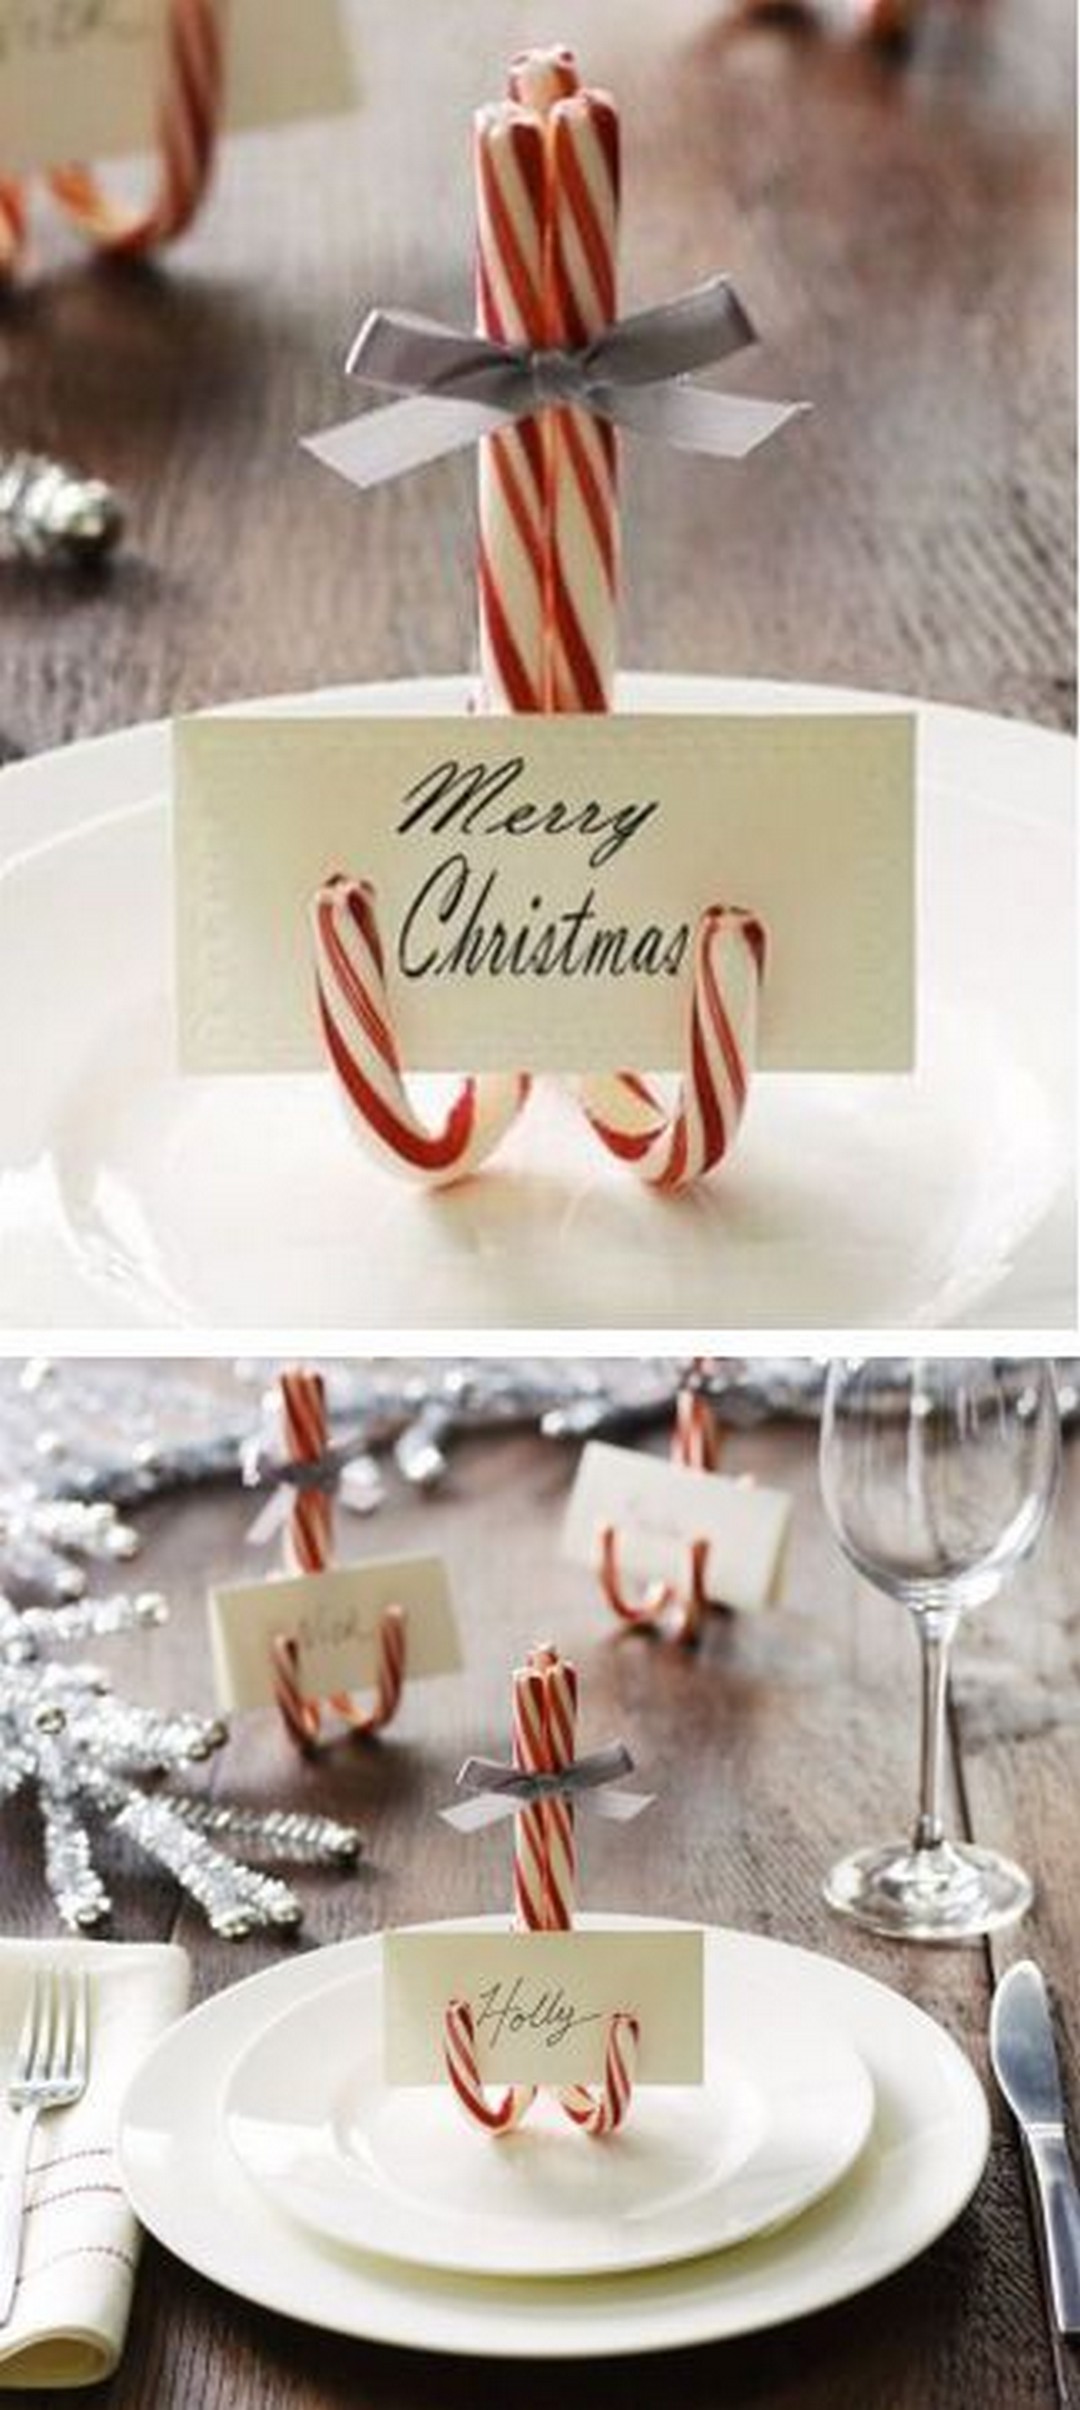 Gorgeous-Holiday-Christmas-Tablescapes-Ideas-21.jpg